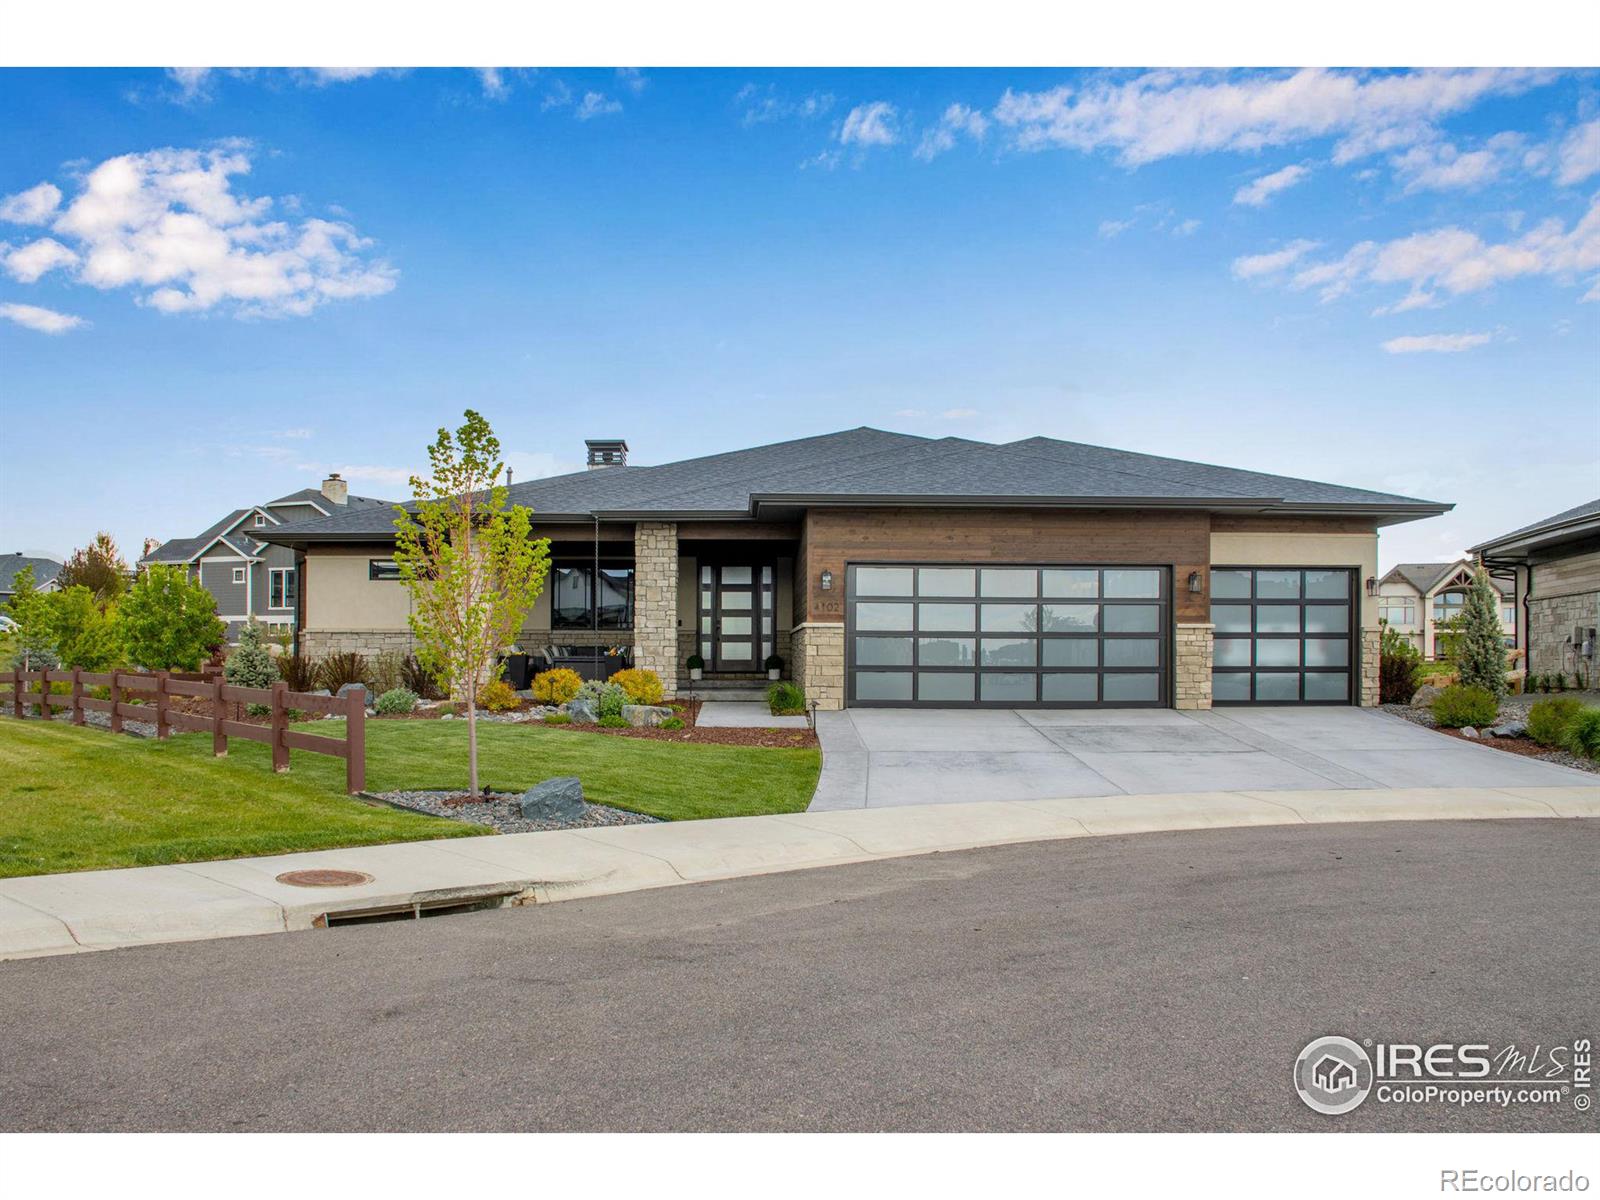 Report Image for 4102  Prestwich Court,Timnath, Colorado